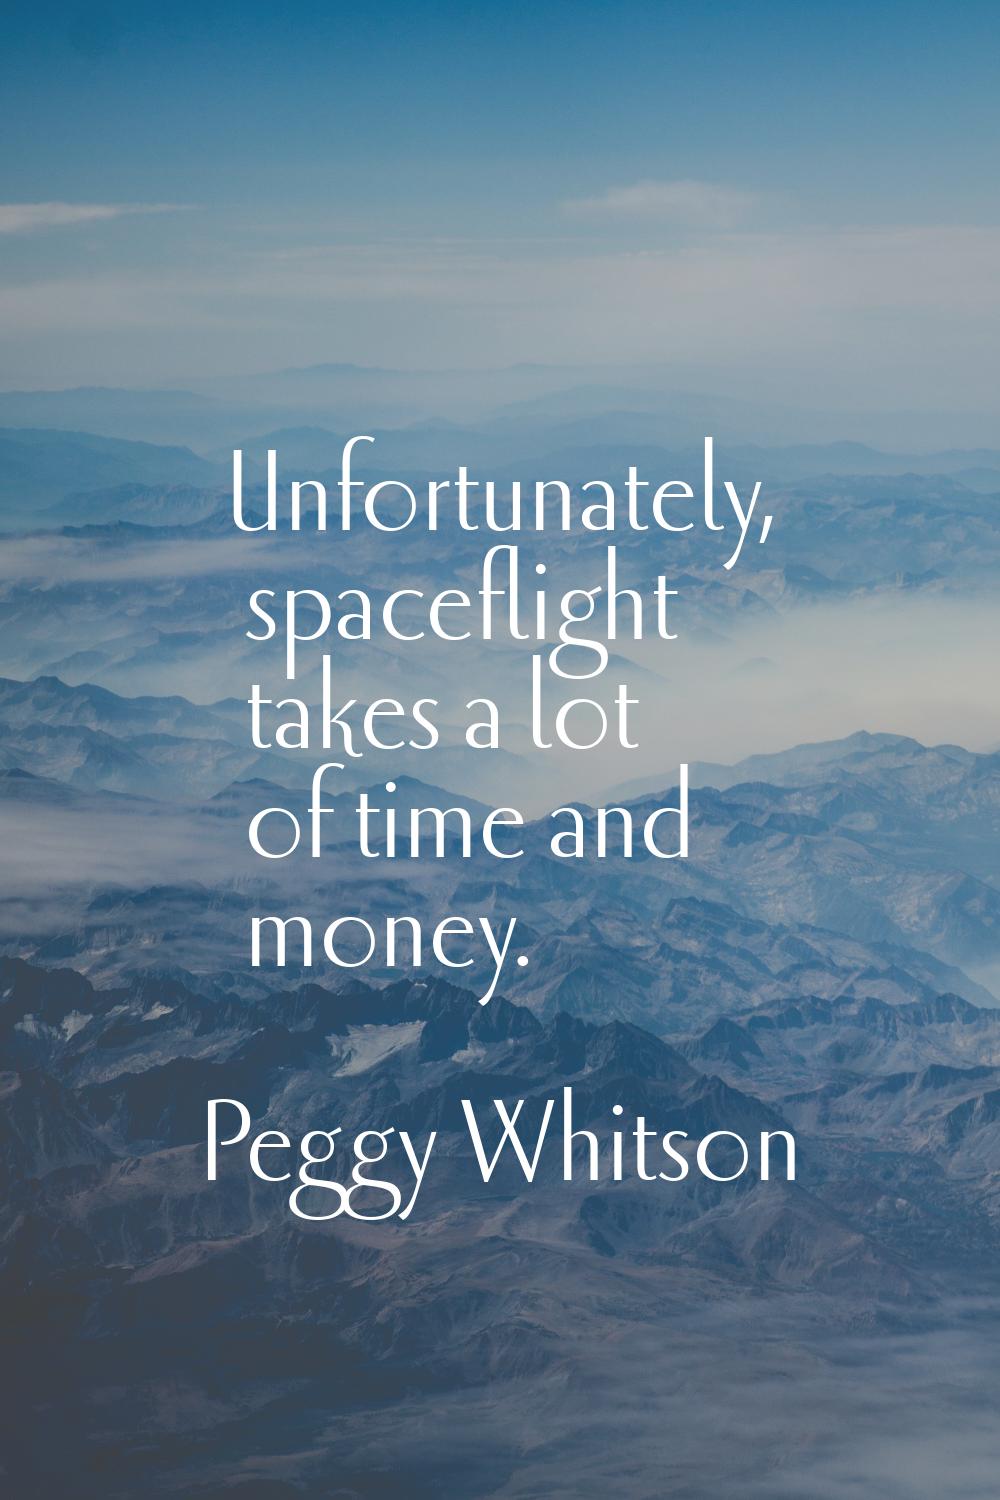 Unfortunately, spaceflight takes a lot of time and money.